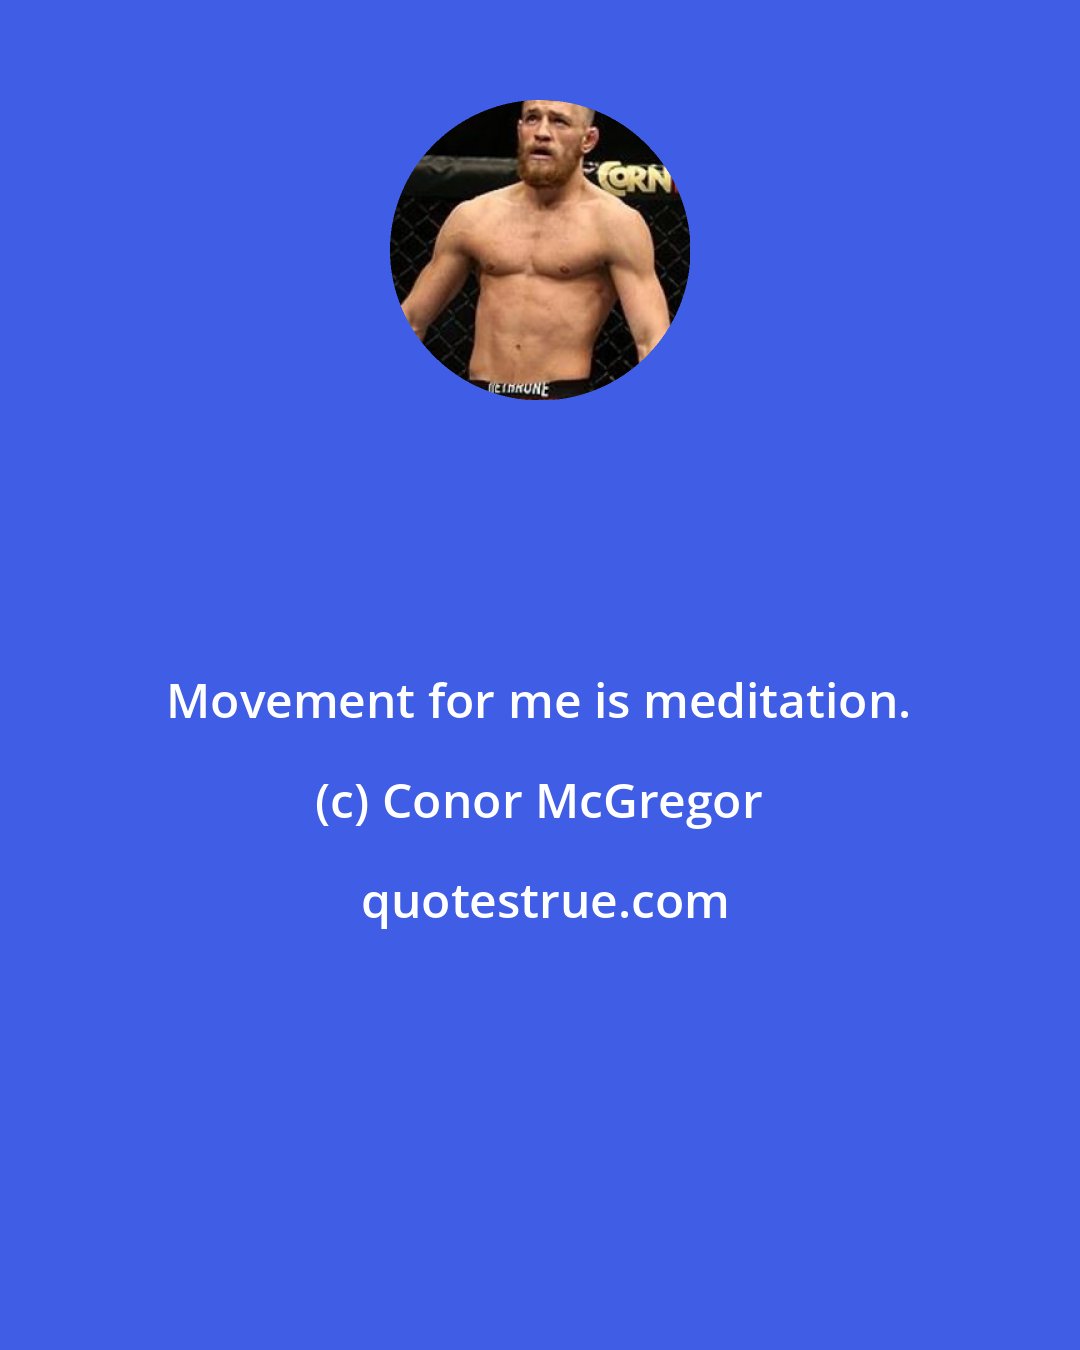 Conor McGregor: Movement for me is meditation.